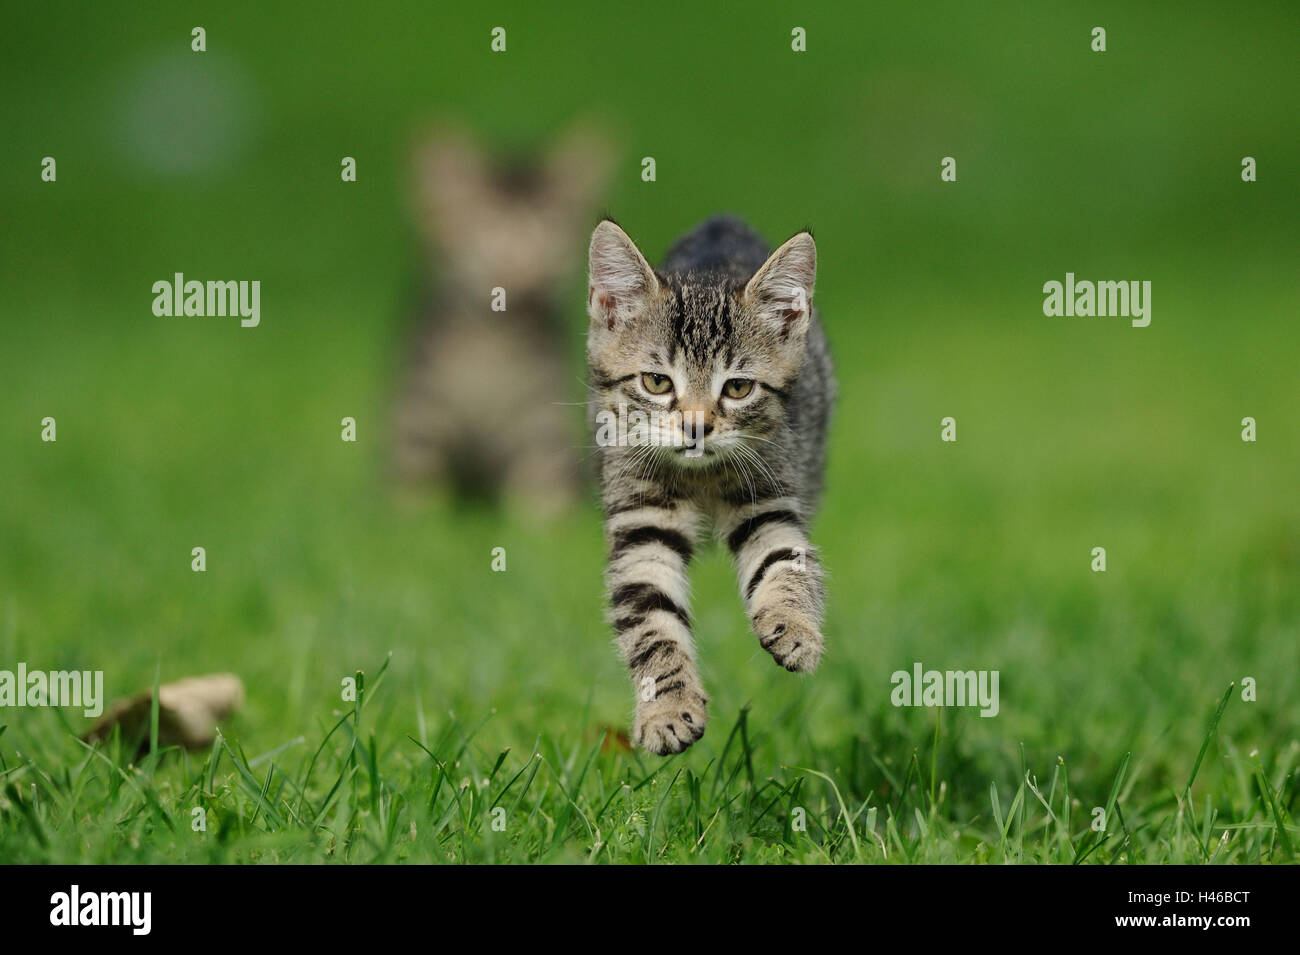 Domestic cat, young animal, meadow, running, front view, Stock Photo